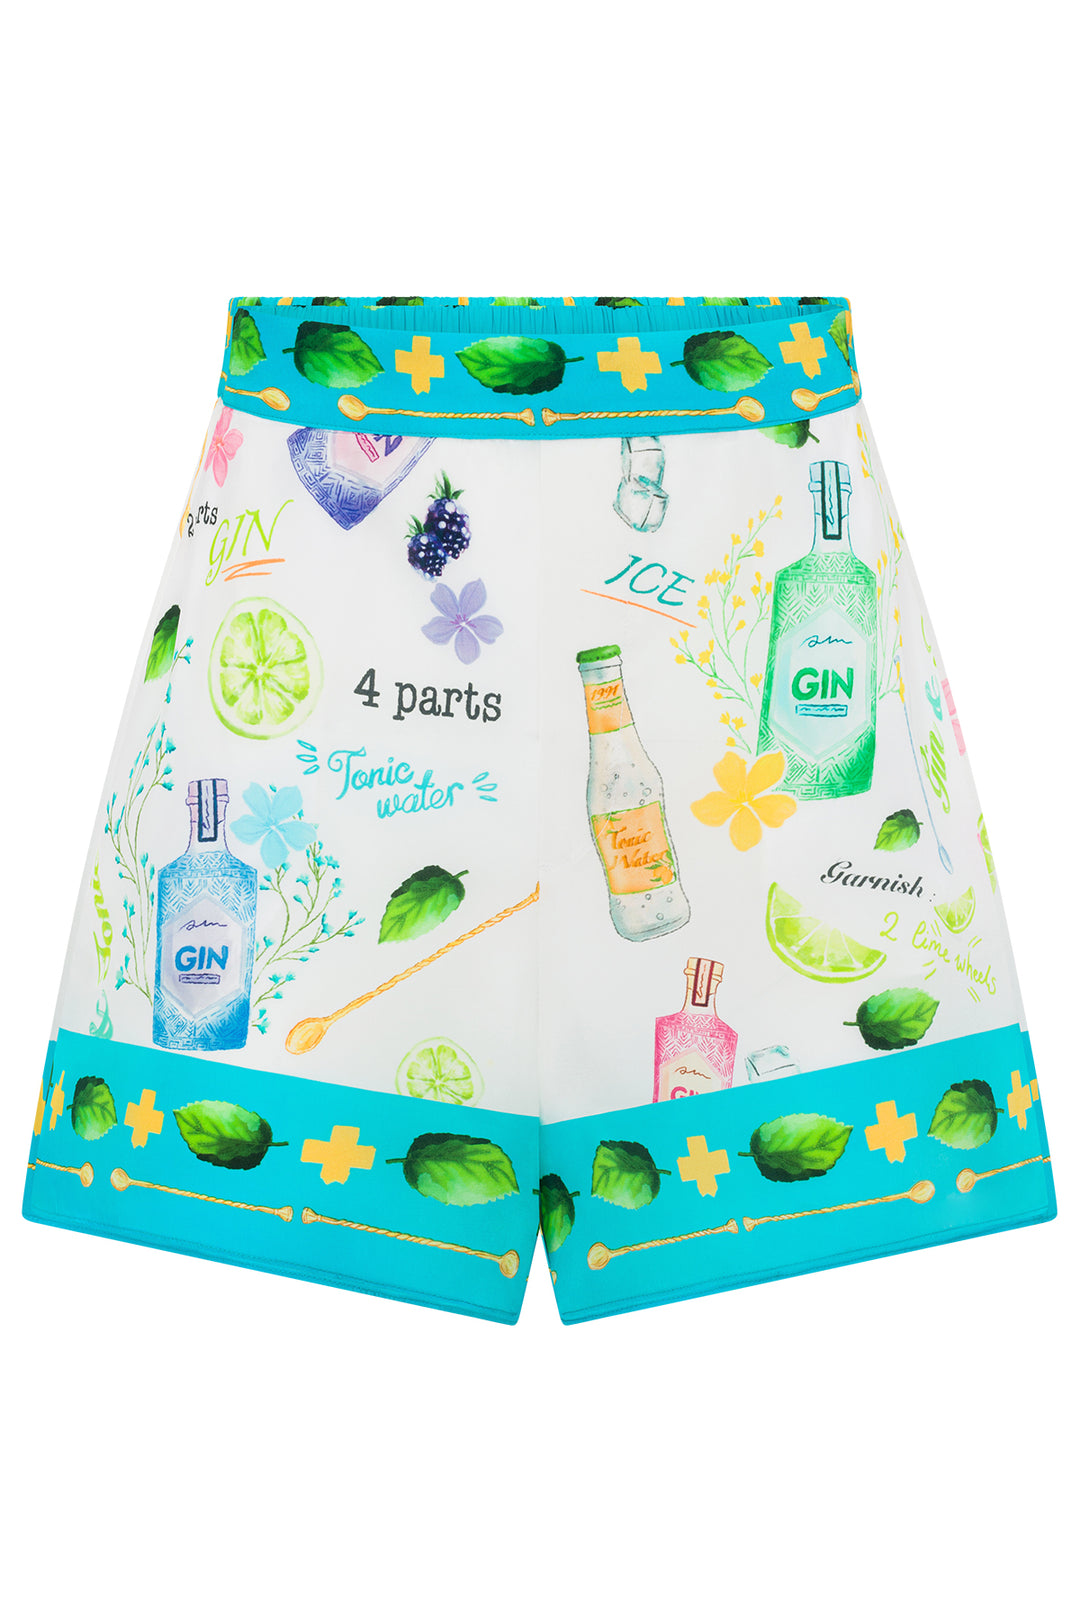 The G&T Silky Shorts